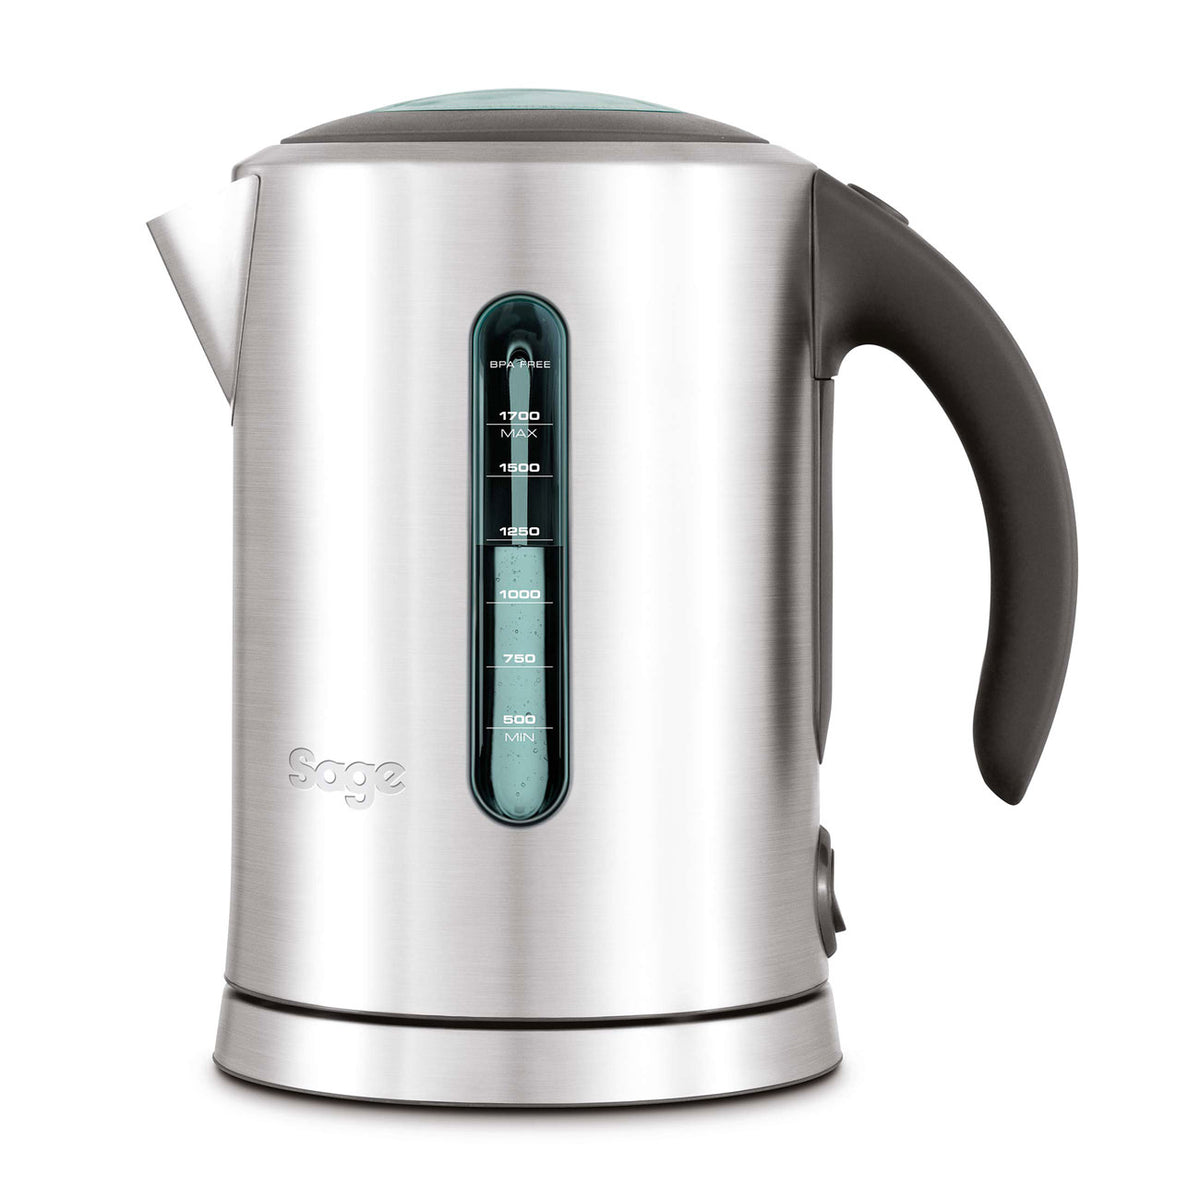 Sage Soft Top Pure 1.7L 2400W Kettle - Brushed Stainless Steel | SKE700BSS3GUK1 from Sage - DID Electrical